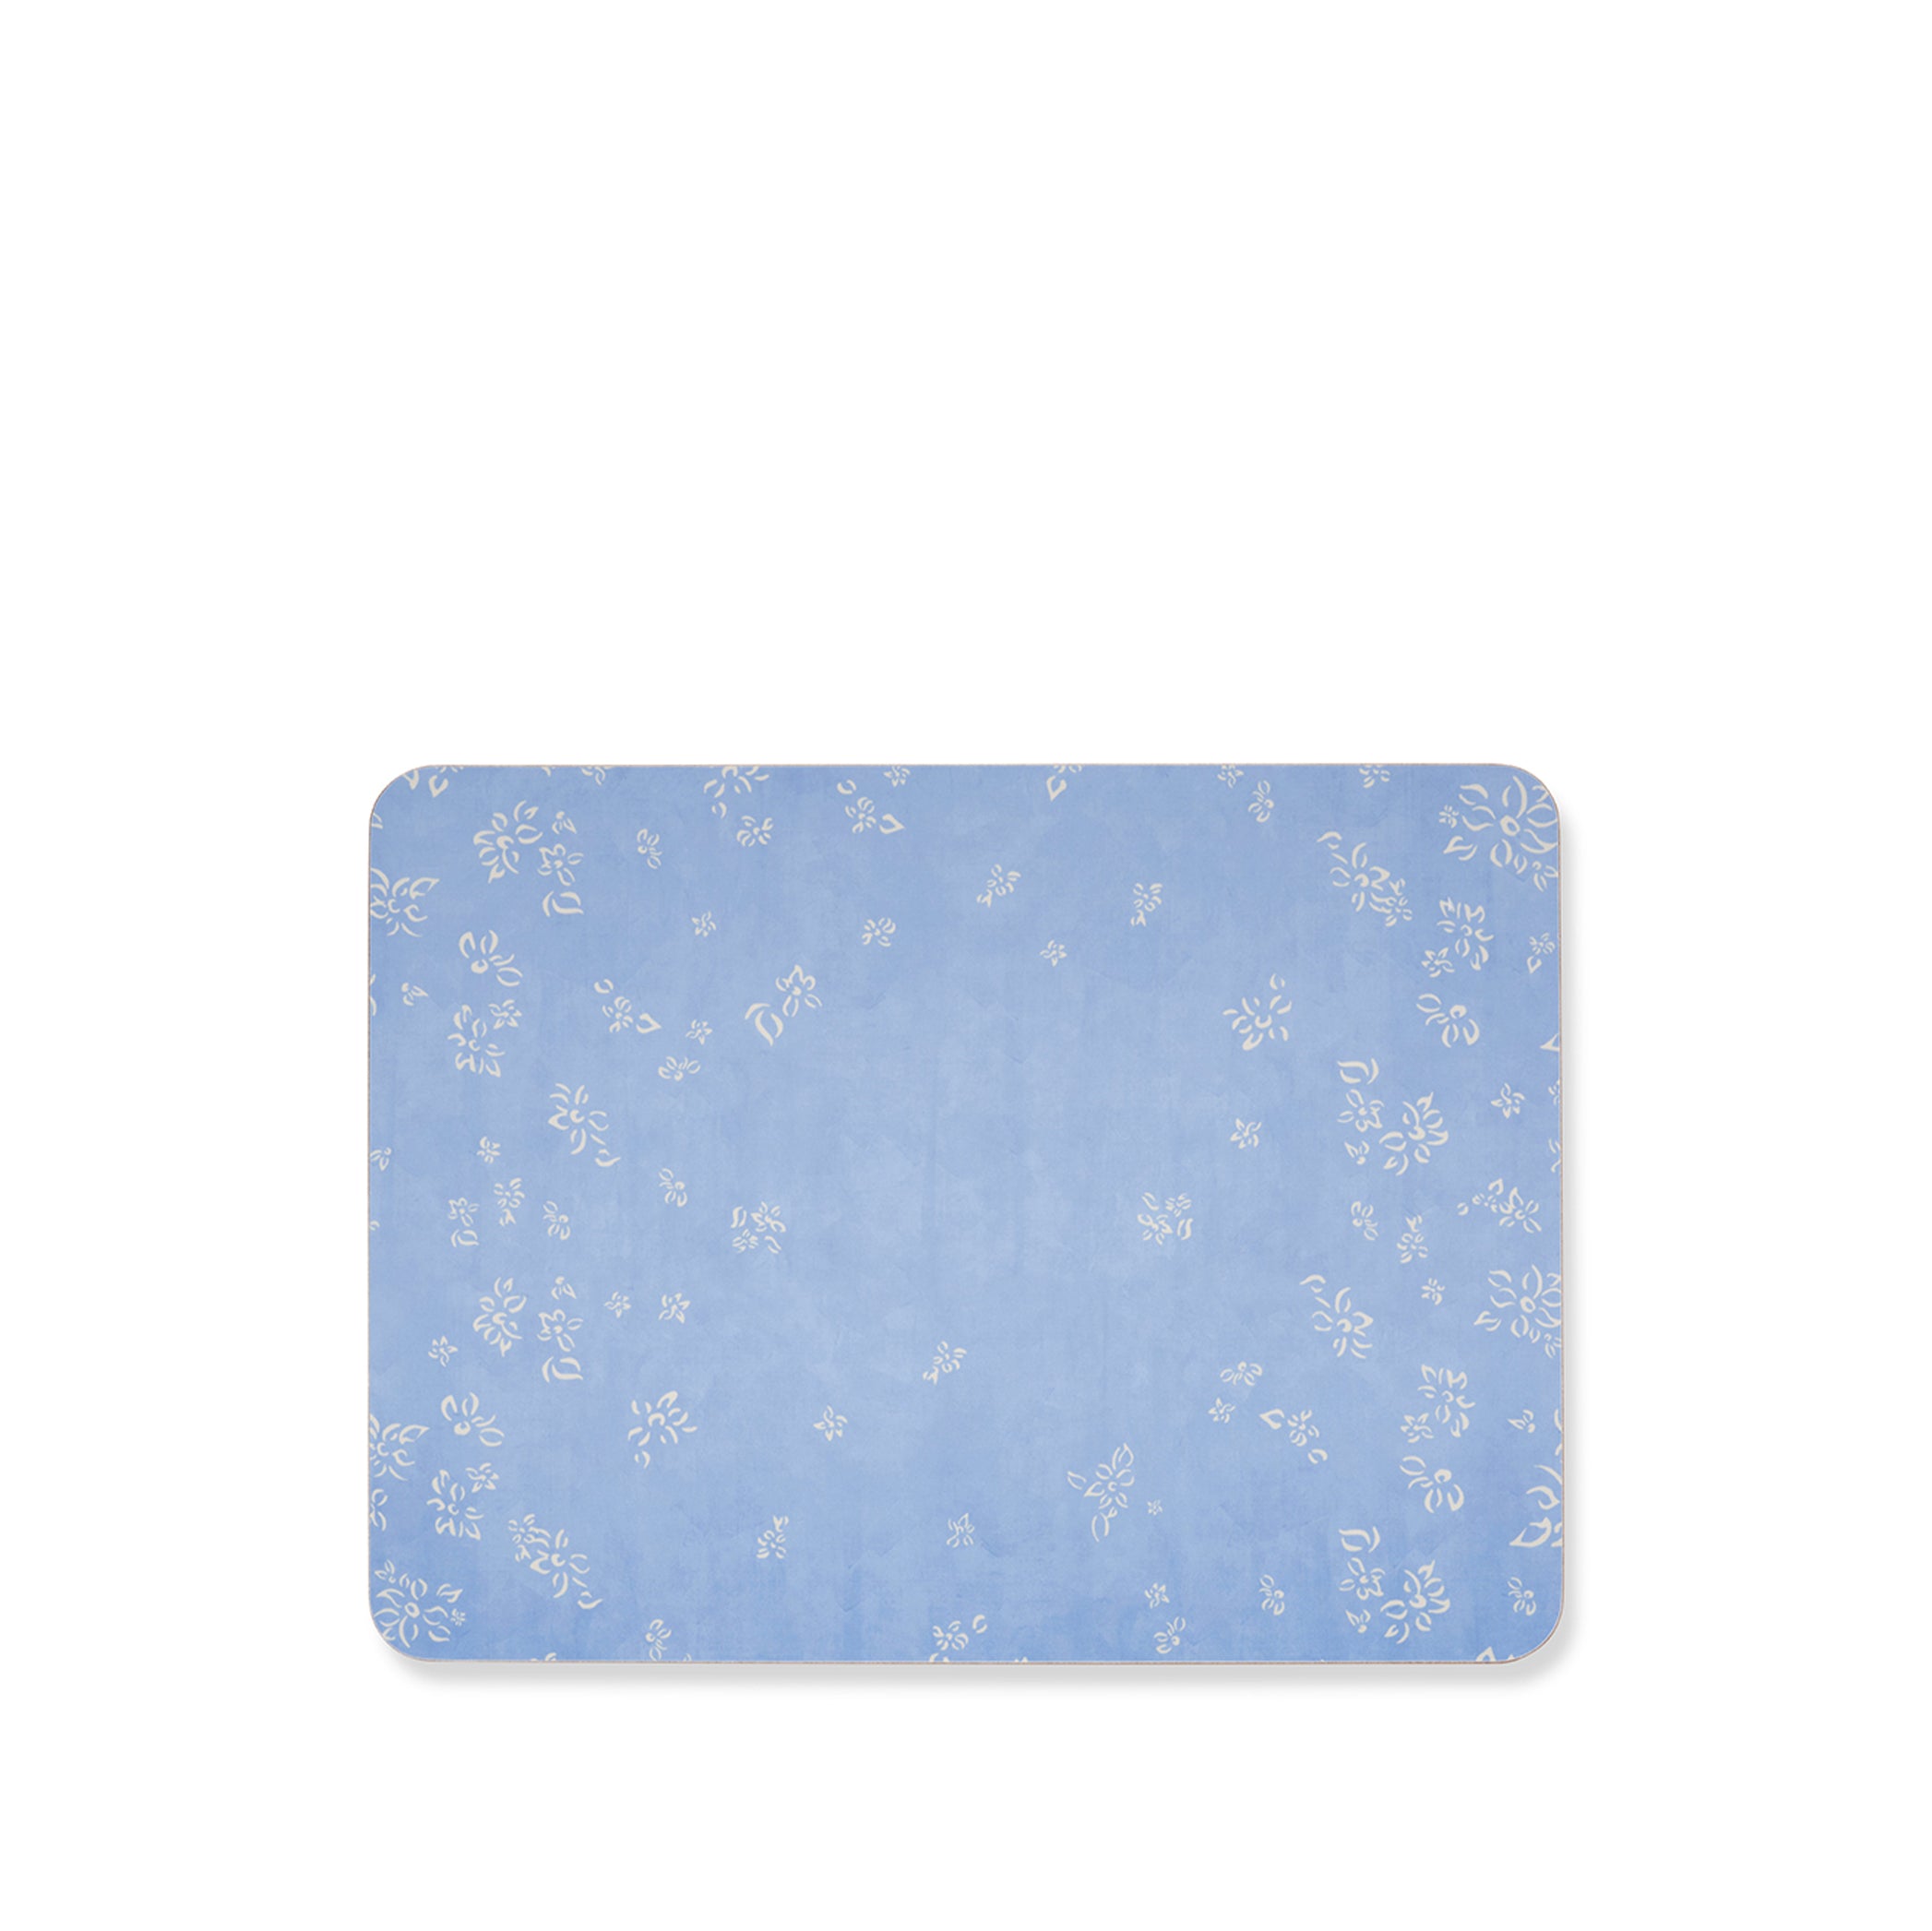 Falling Flower Cork-Backed Placemat in Pale Blue